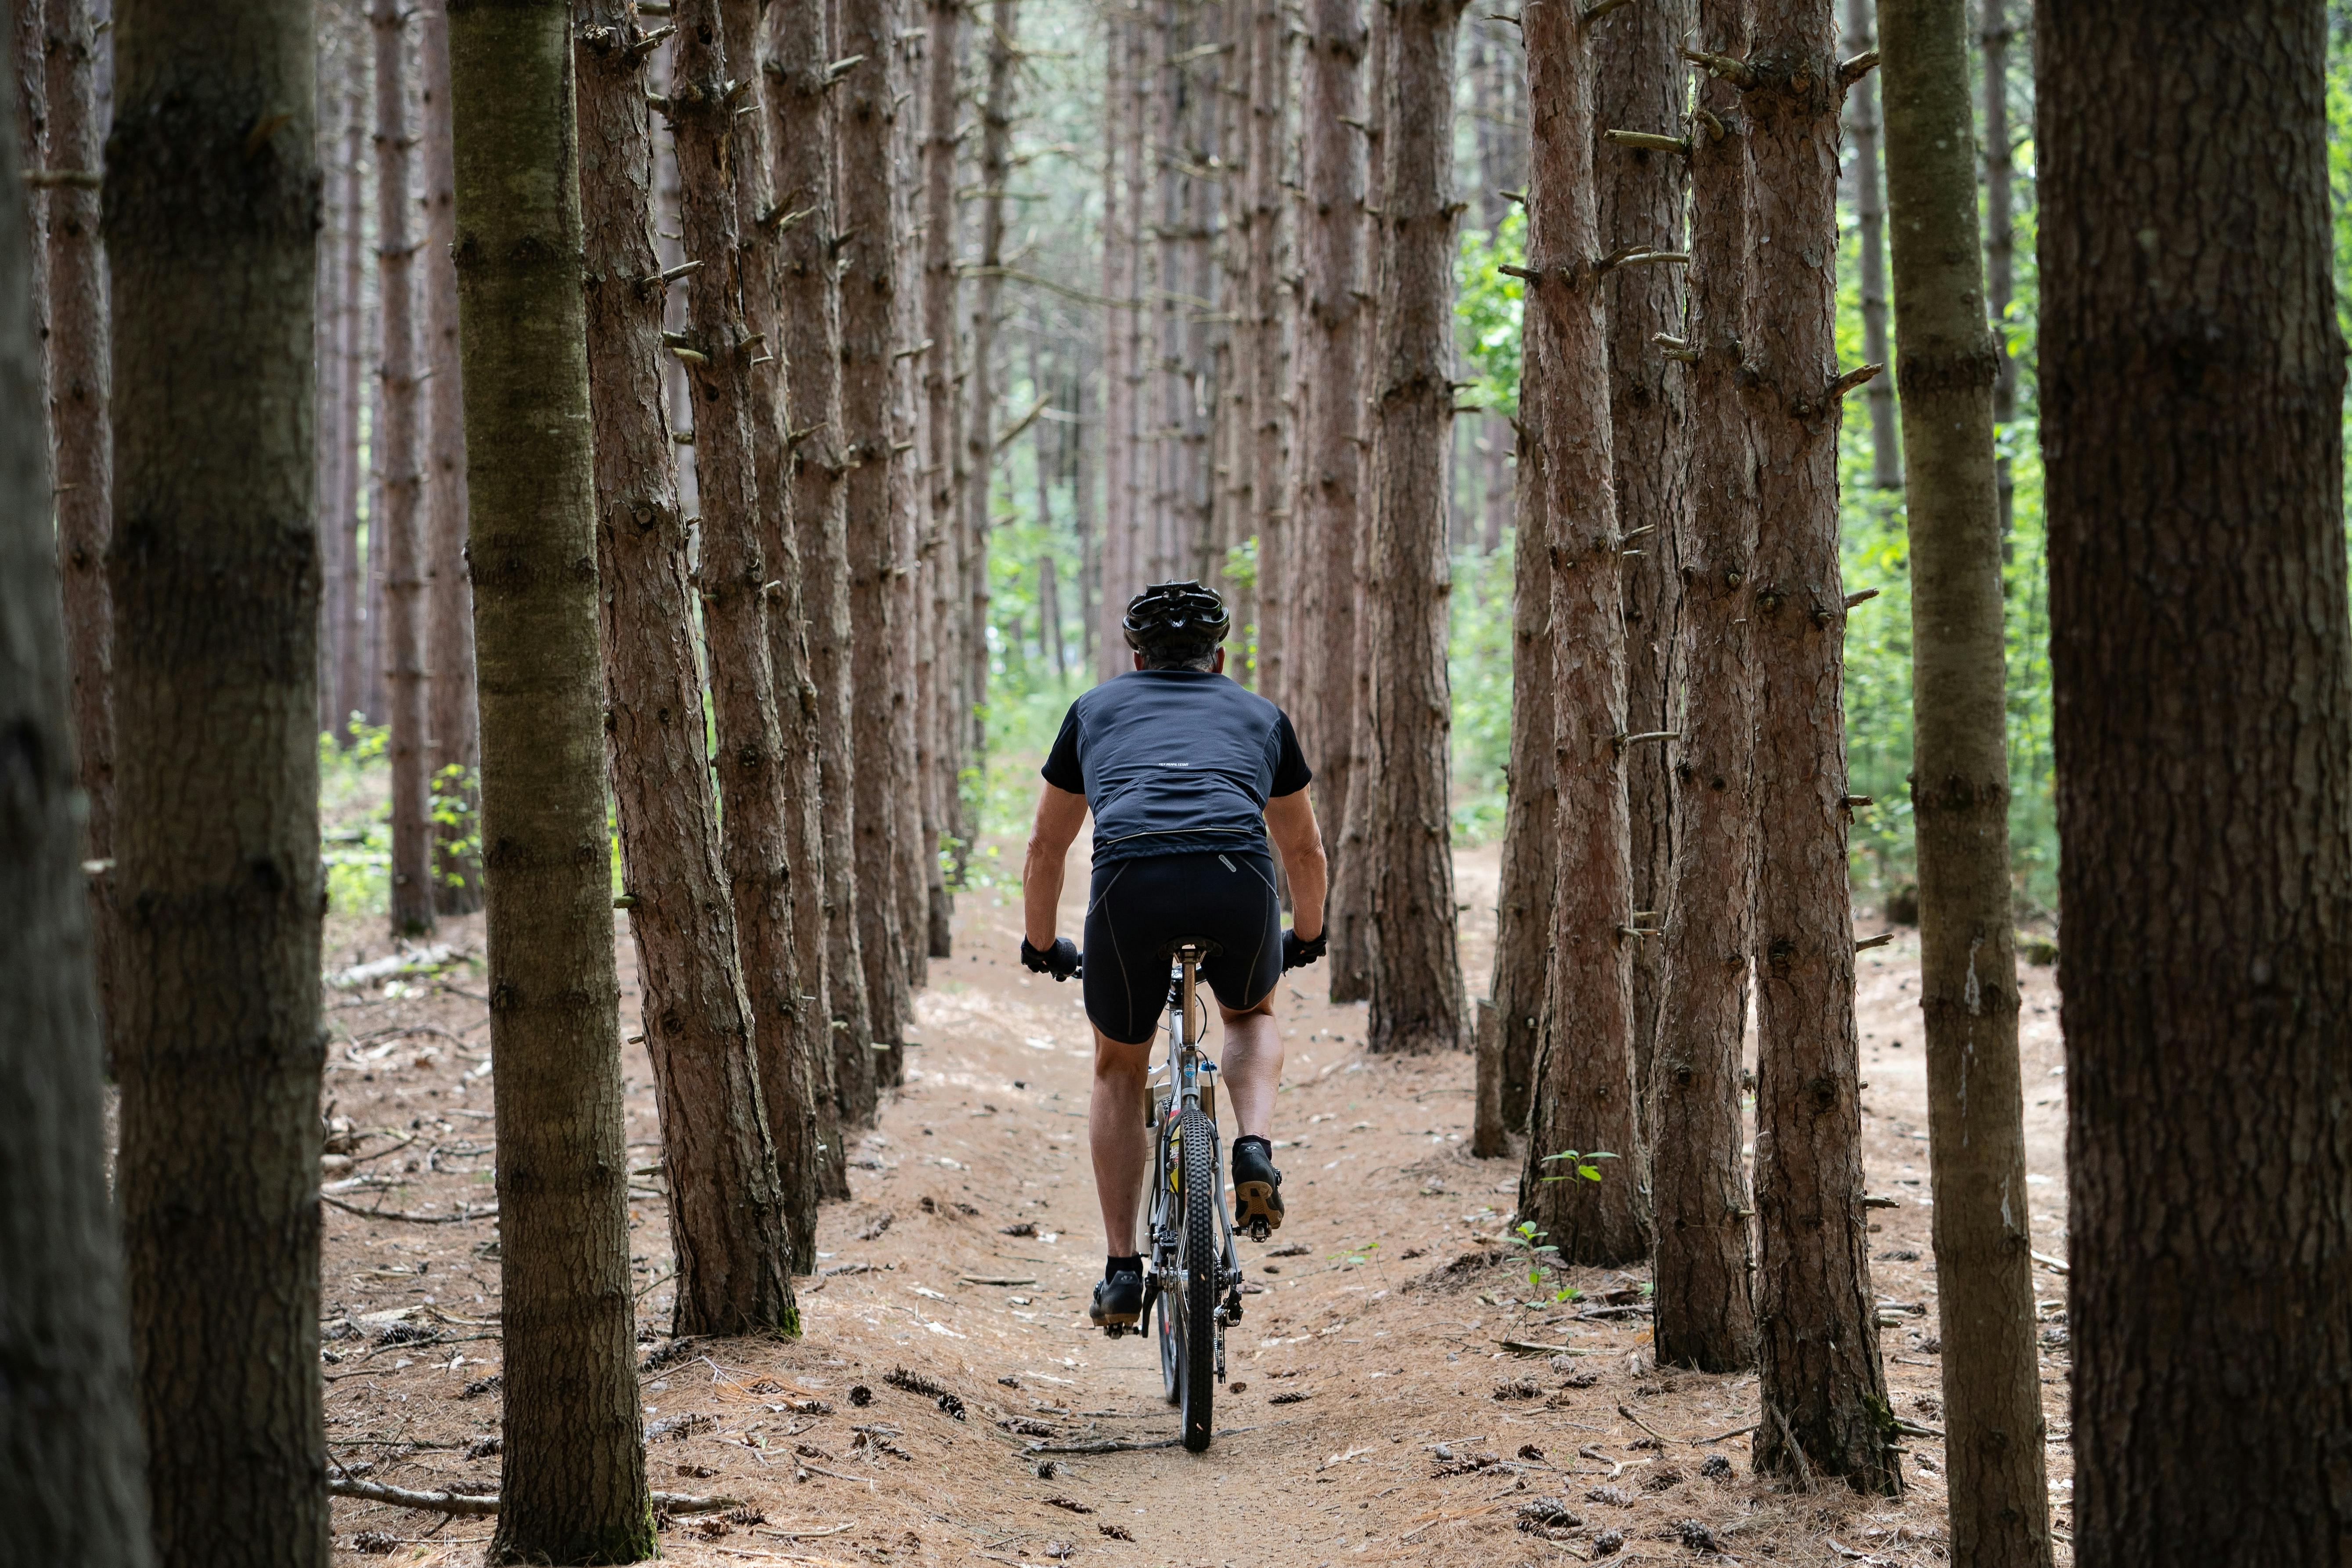 A man cycles away from the camera throw rows of trees